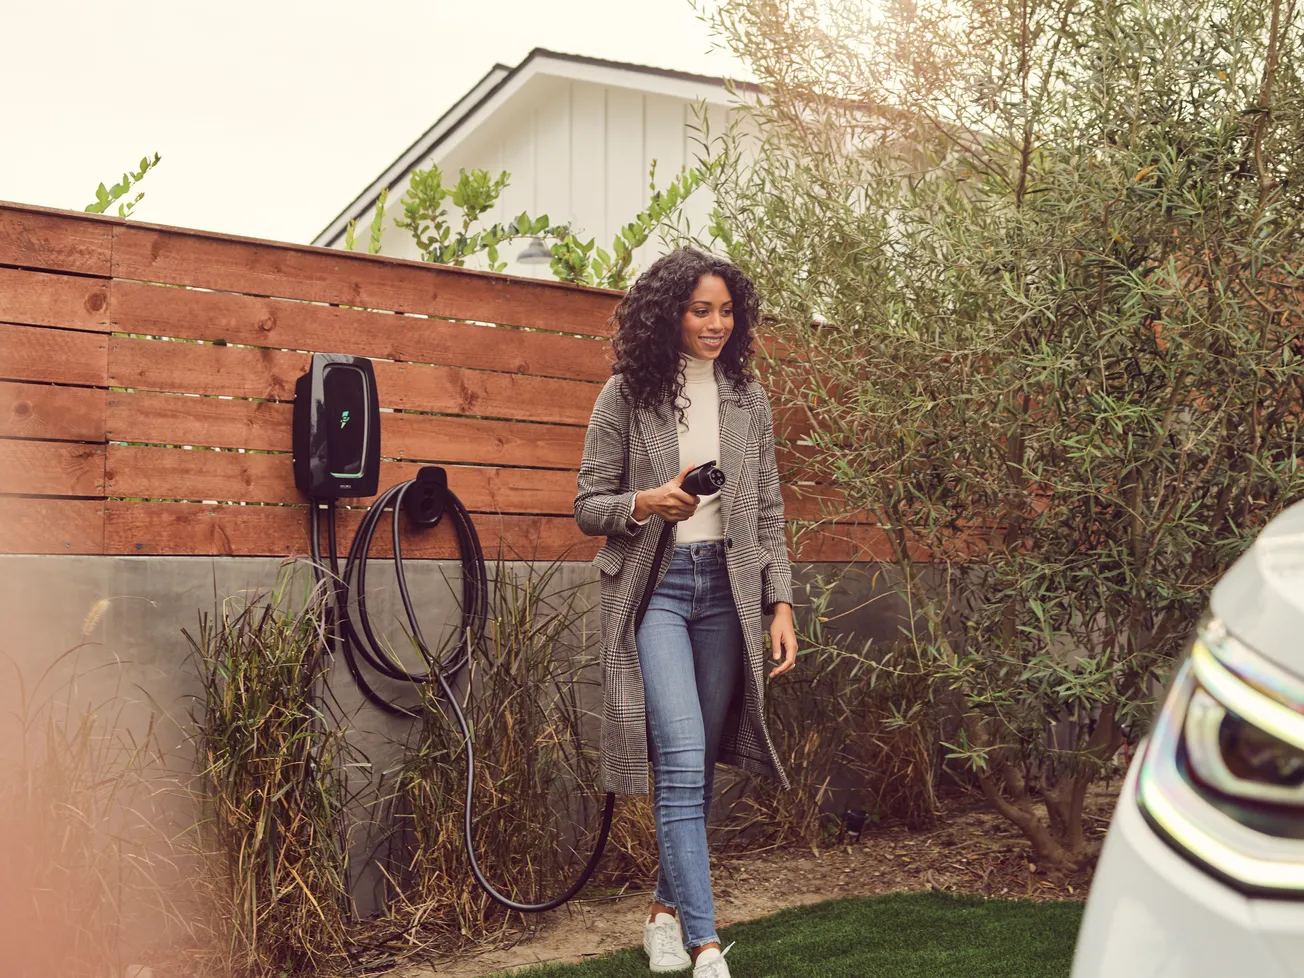 Woman holding an electric car charger